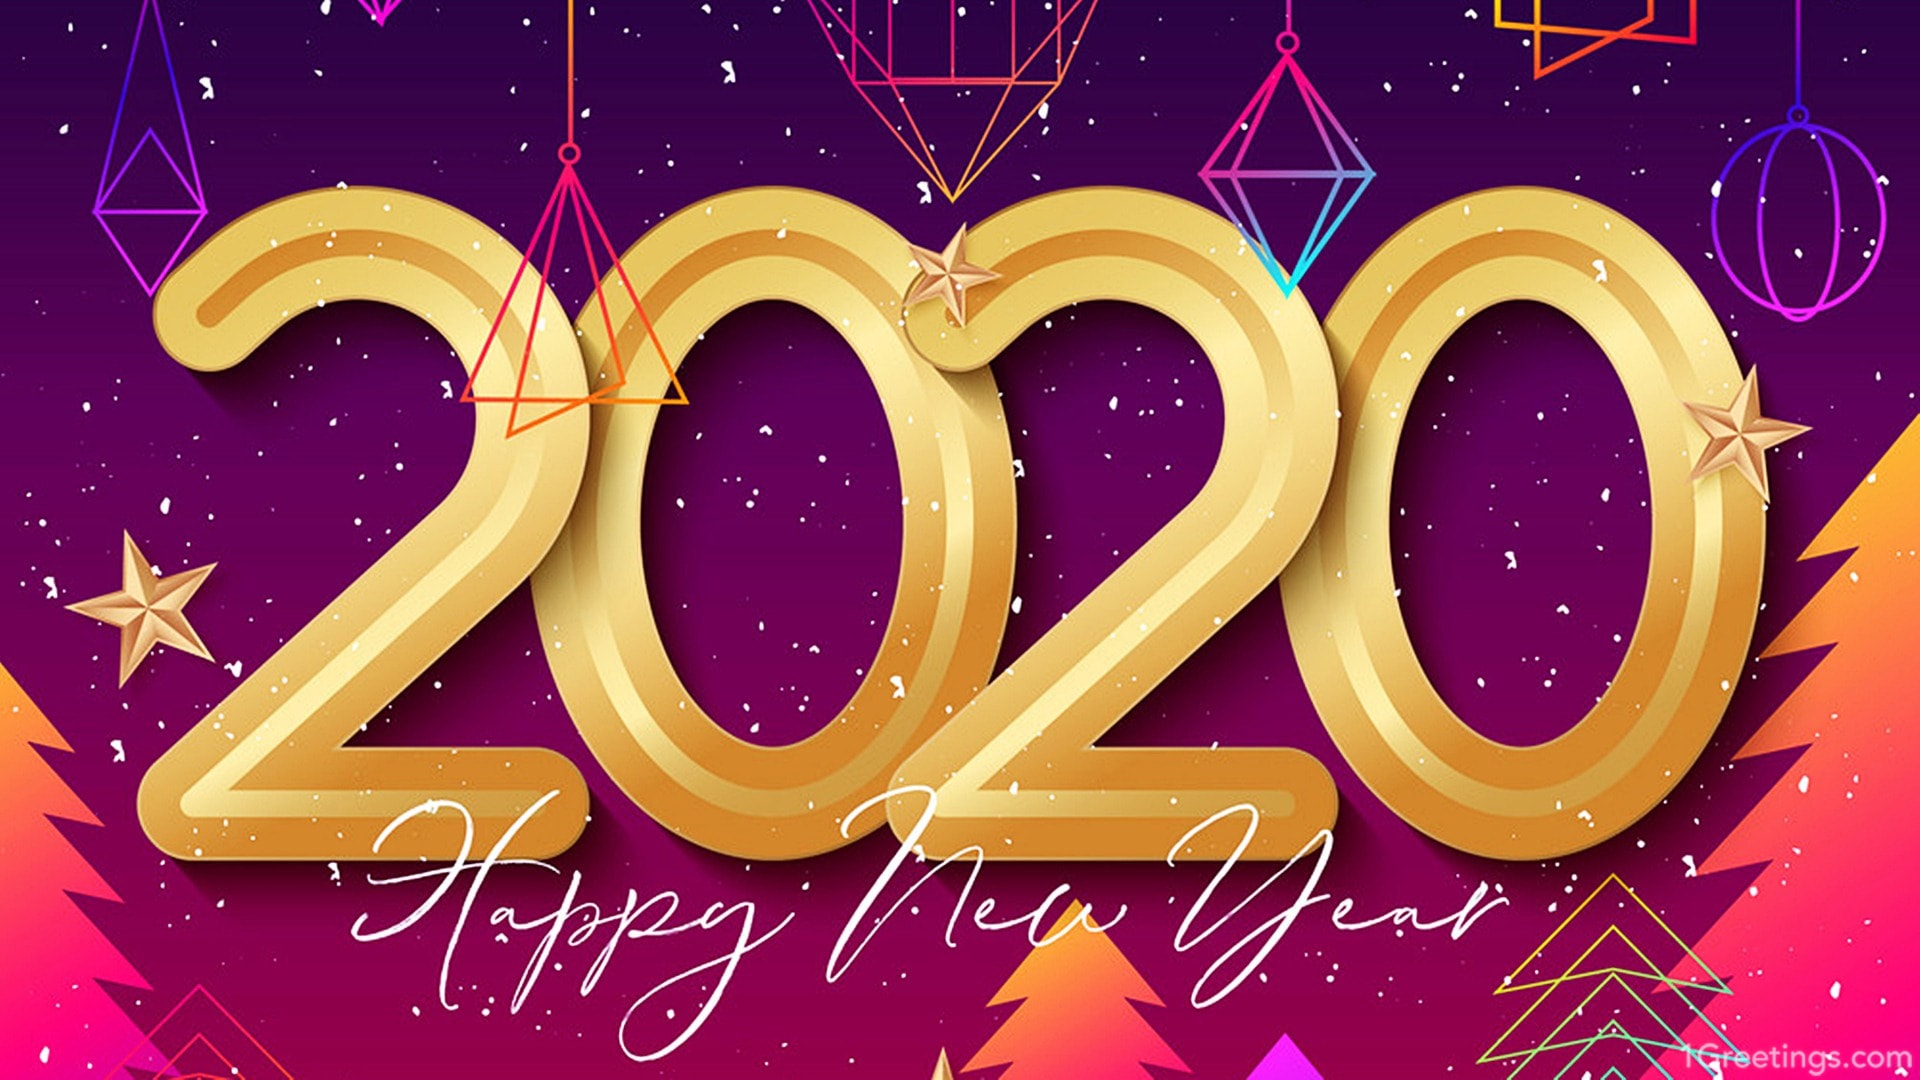 Happy New Year 2020 hd wallpaper & images download